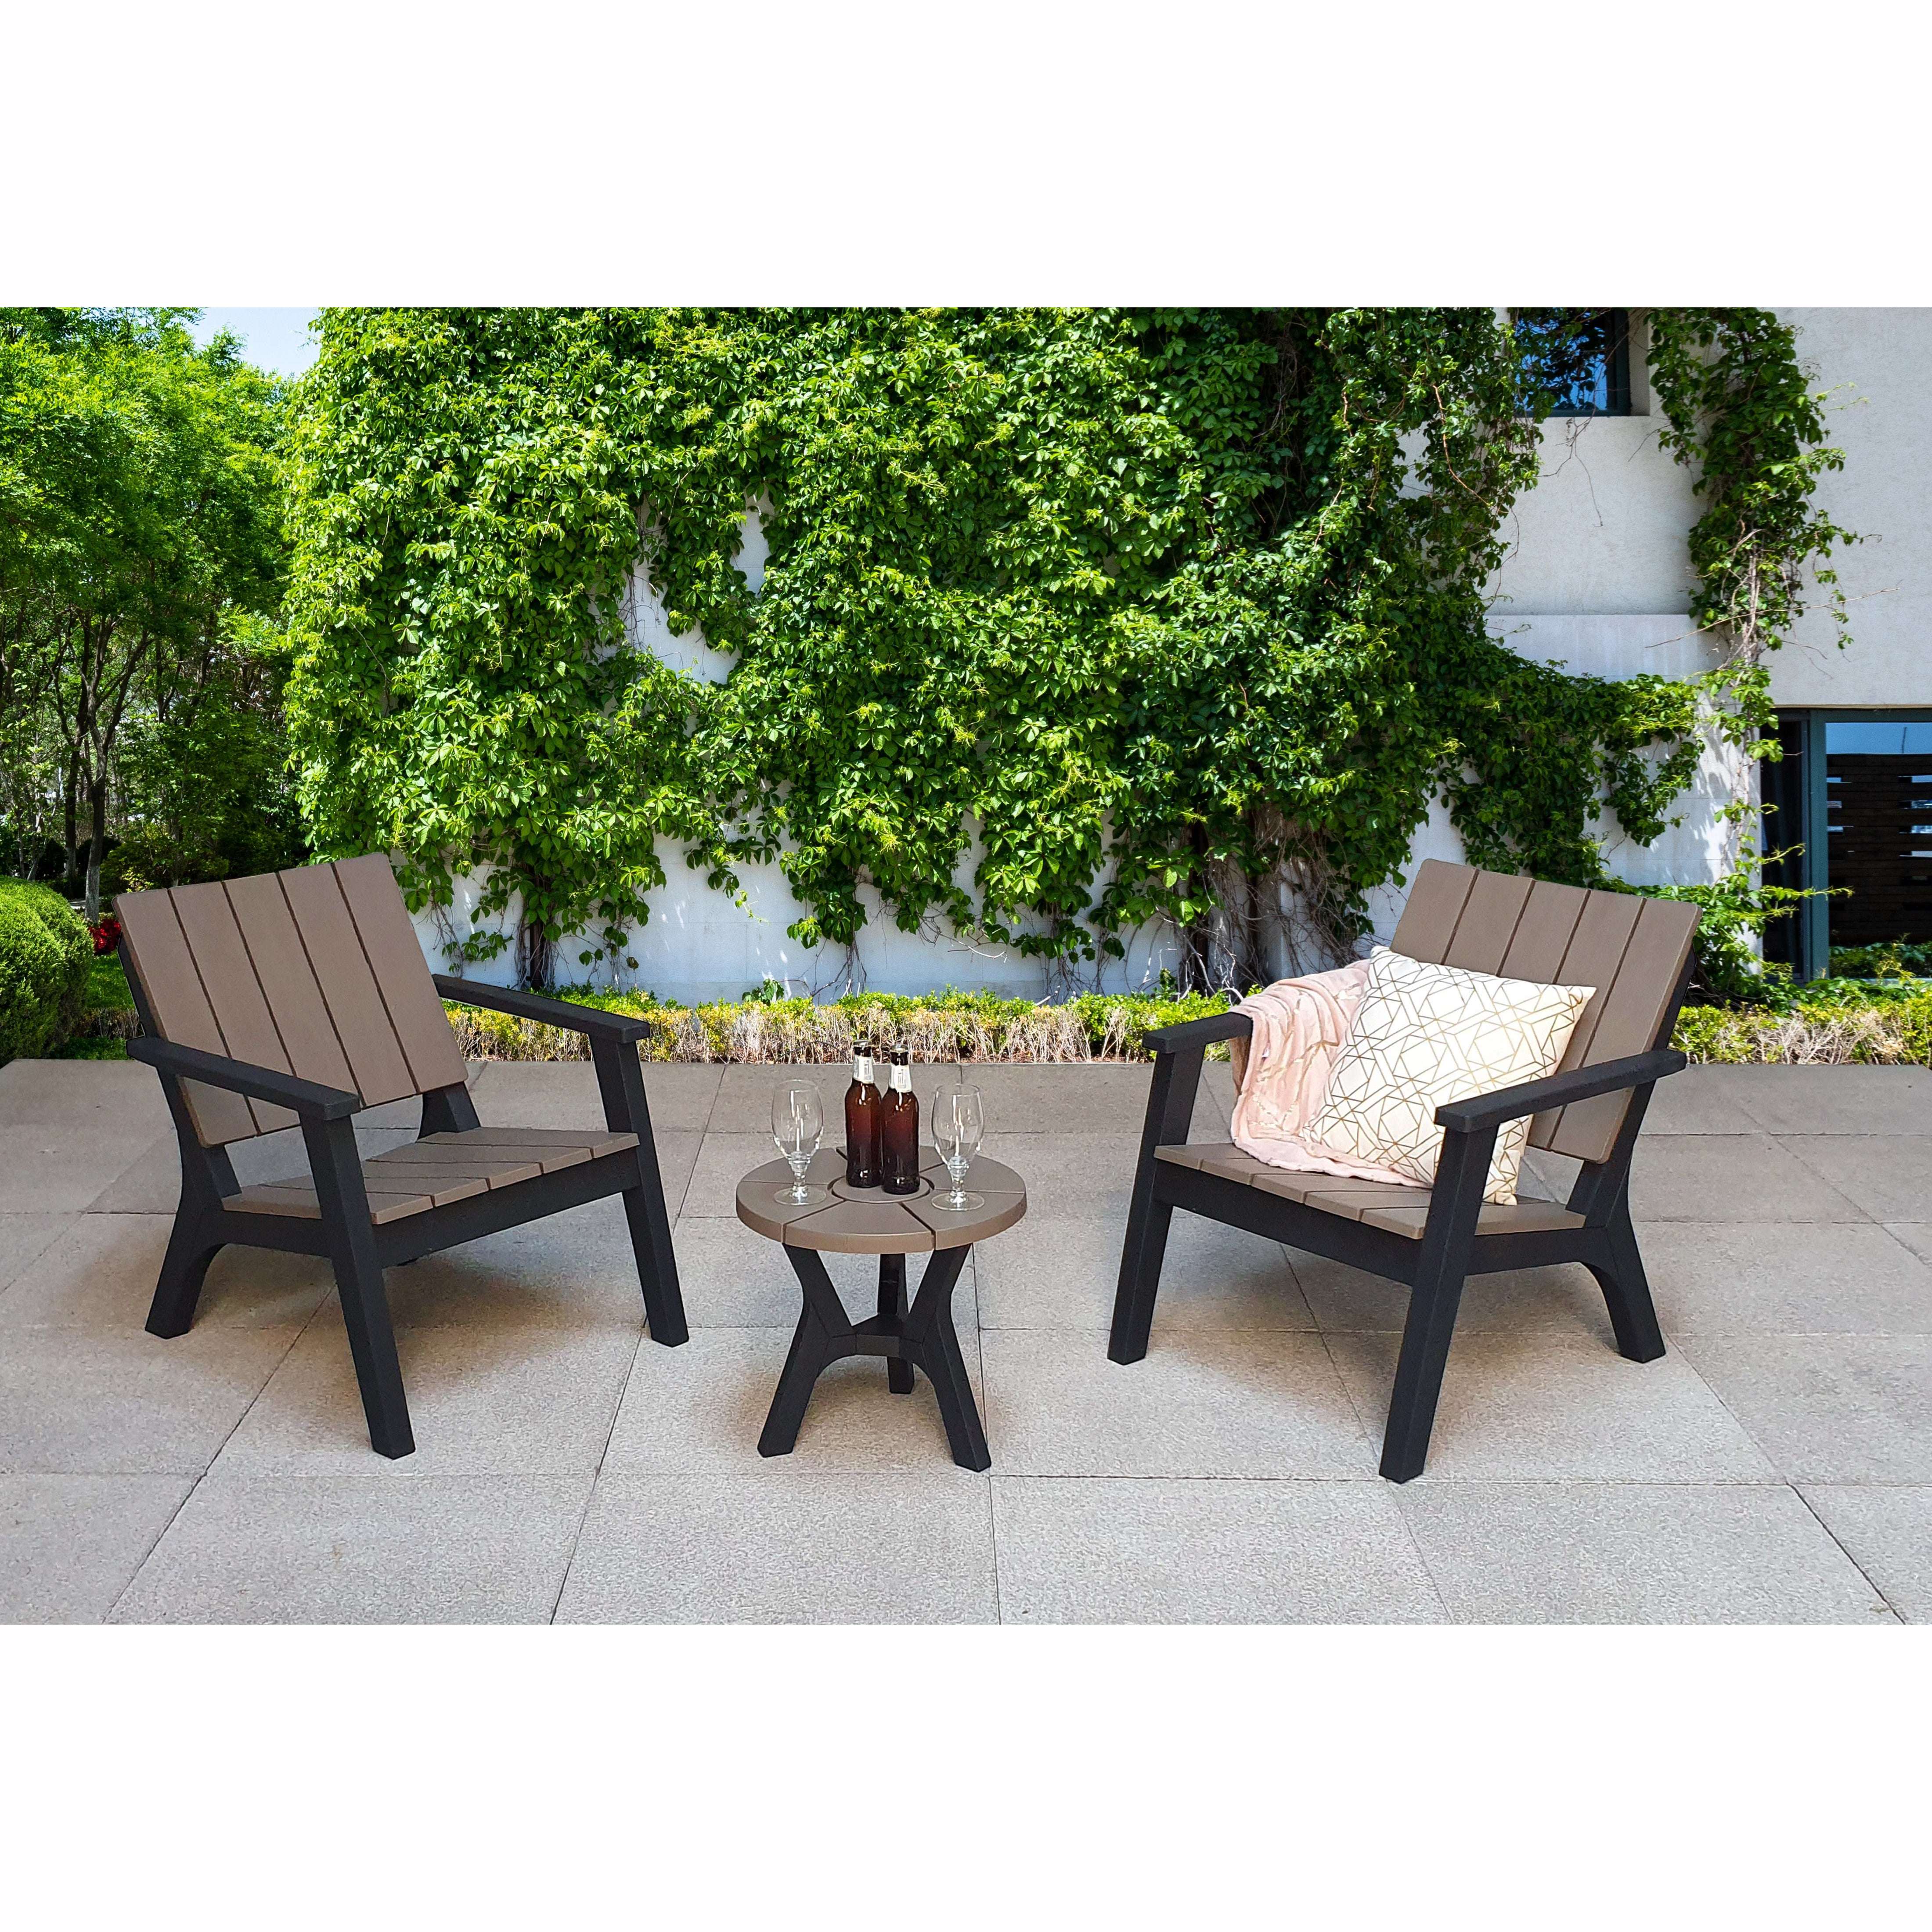 Exceptional Garden:Signature Weave Polly 2-Seater Lounge Set with Small Round Table